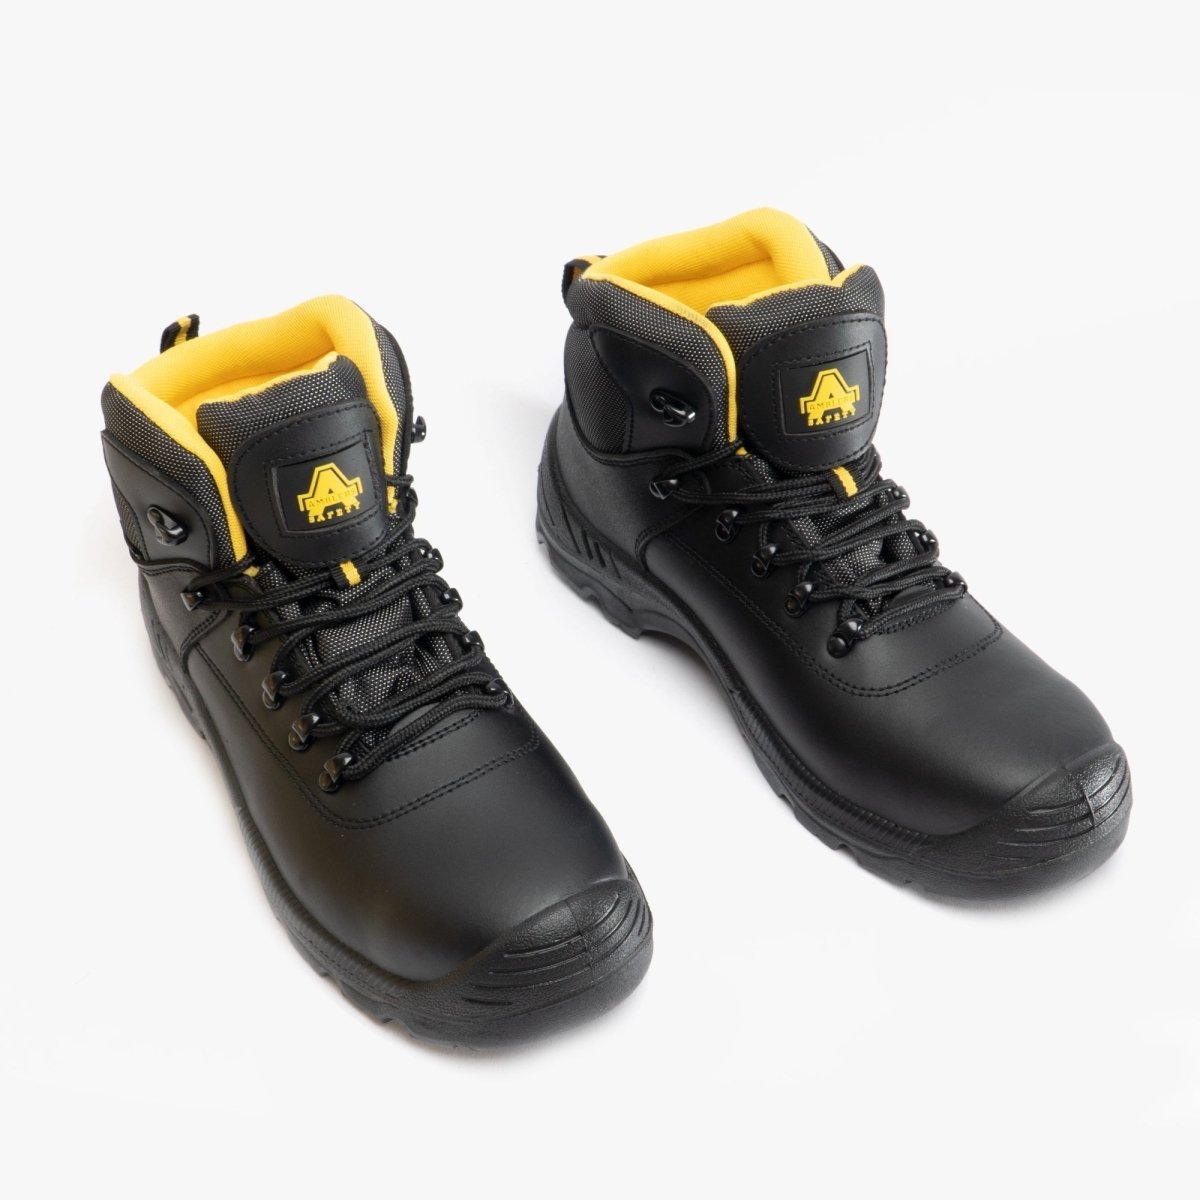 Amblers Safety FS220 Unisex Leather Safety Boots Black 27671 - 46560 - 03 | STB.co.uk